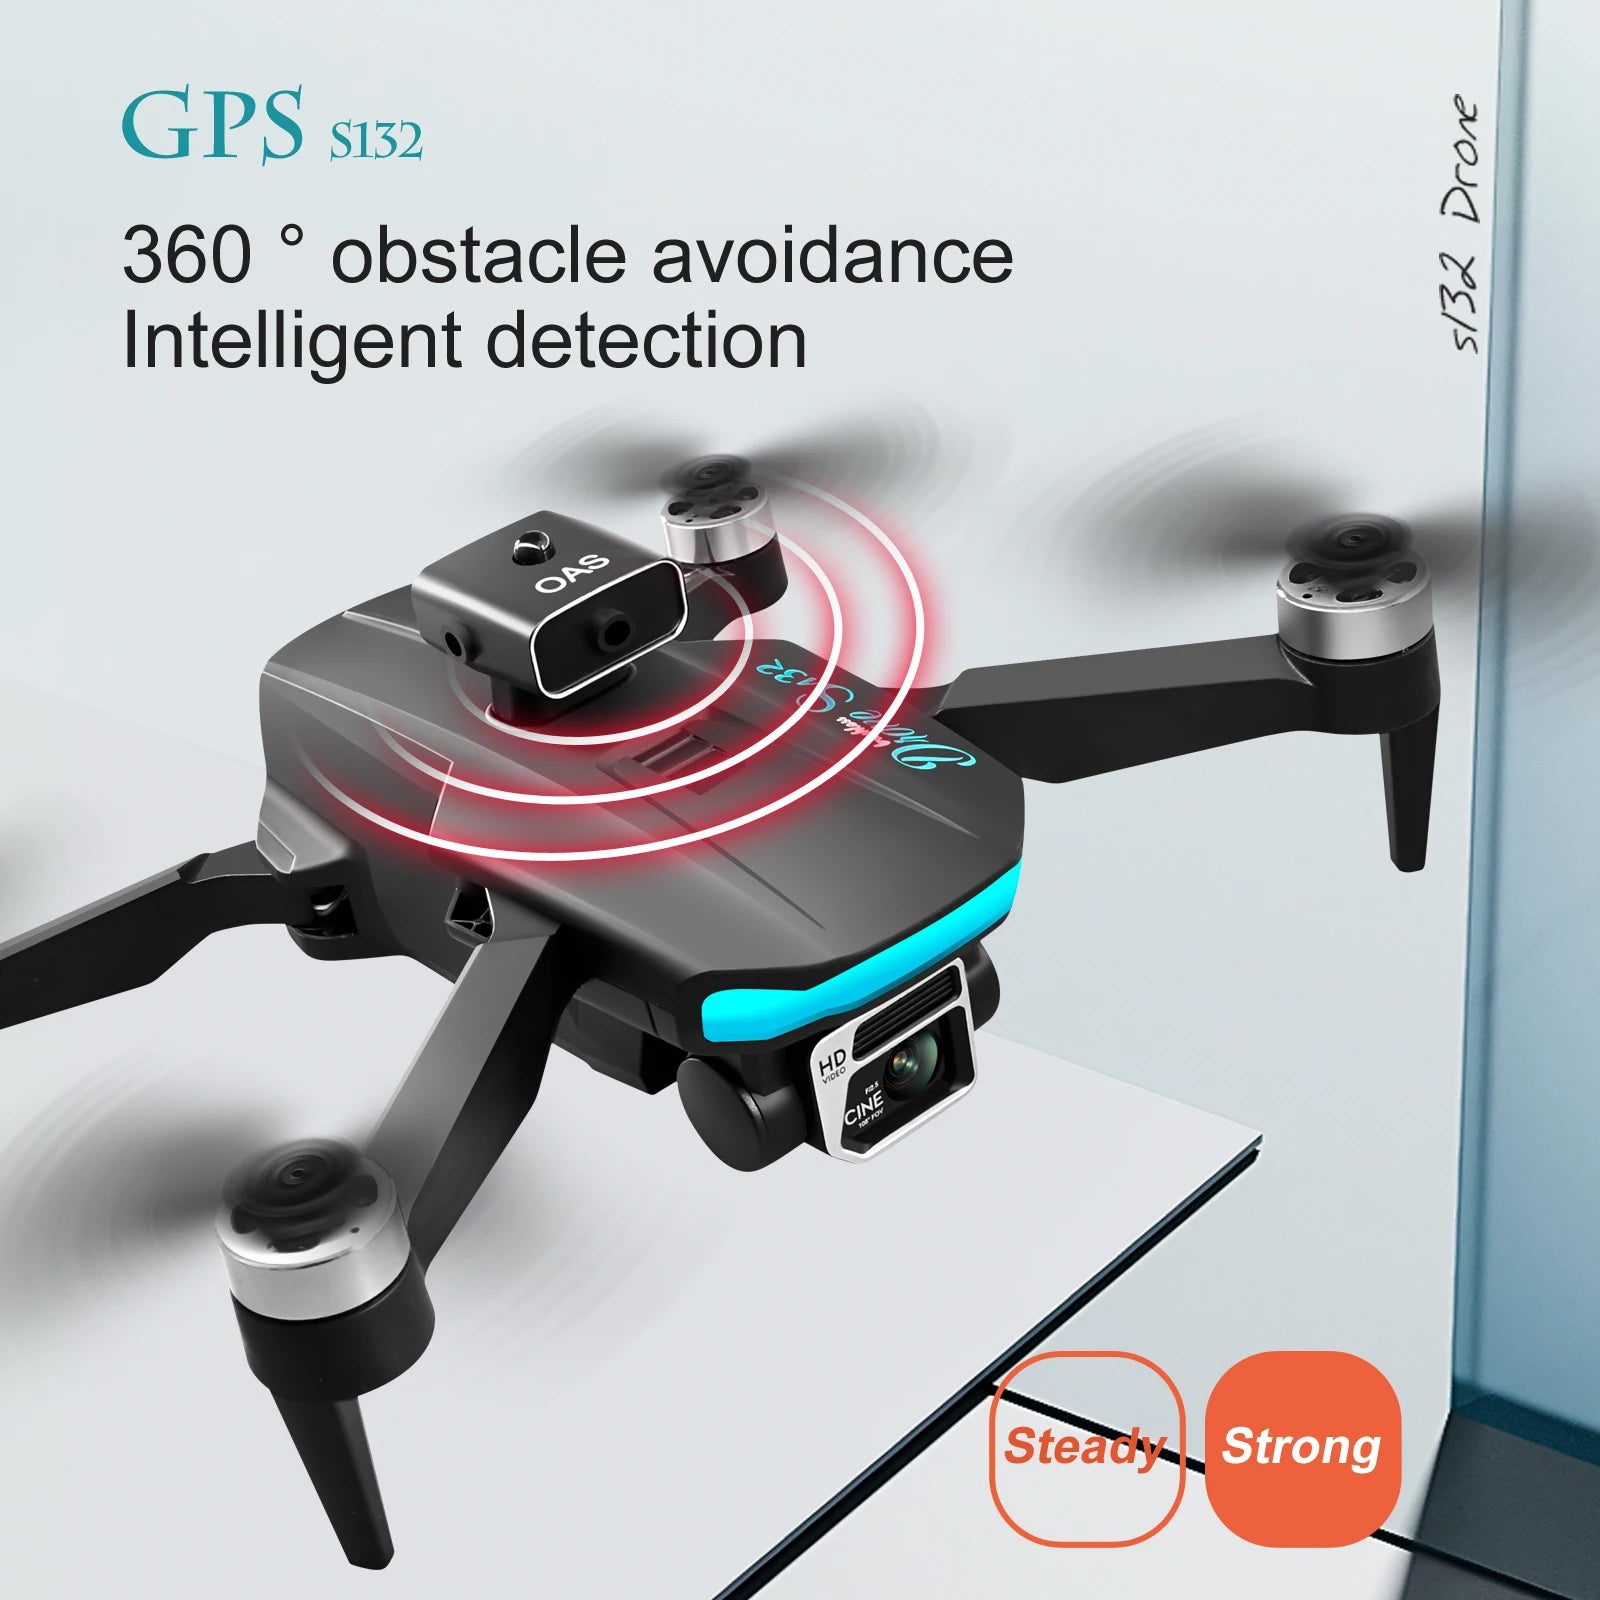 S132 Drone, gps s132 4 360 obstacle avoidance intelligent detection